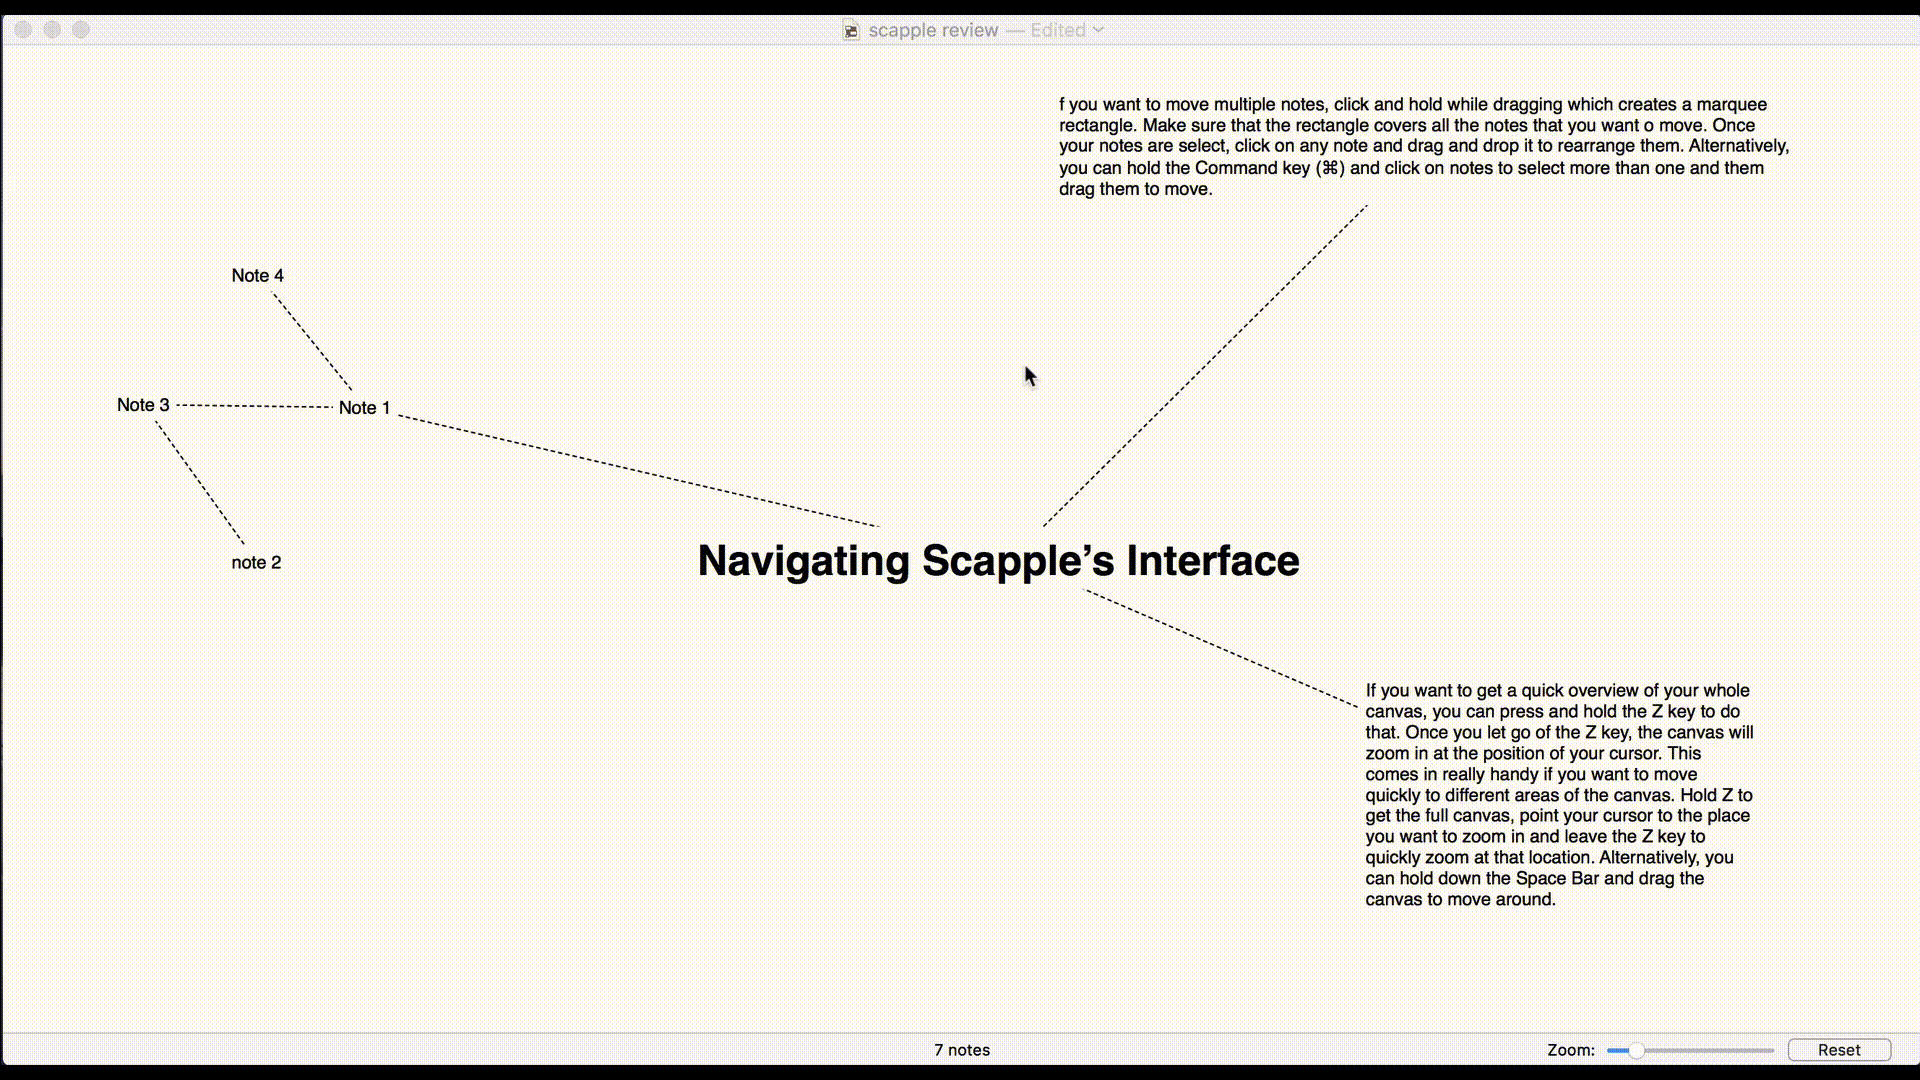 5. Navigating Scapple’s Interface 3